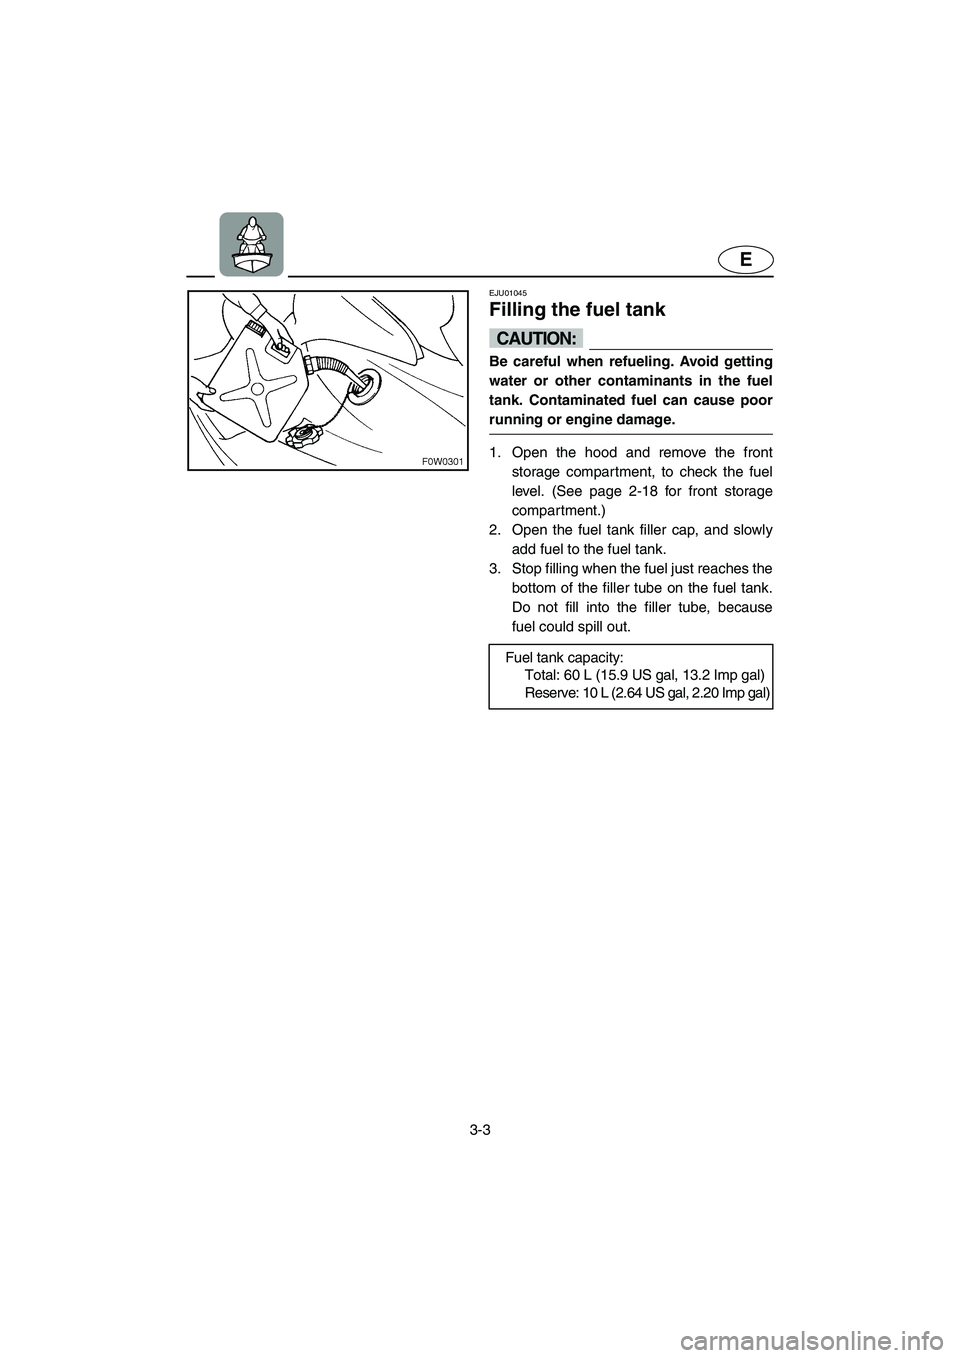 YAMAHA GP800R 2002 Service Manual 3-3
E
EJU01045 
Filling the fuel tank  
CAUTION:@ Be careful when refueling. Avoid getting
water or other contaminants in the fuel
tank. Contaminated fuel can cause poor
running or engine damage. 
@ 
